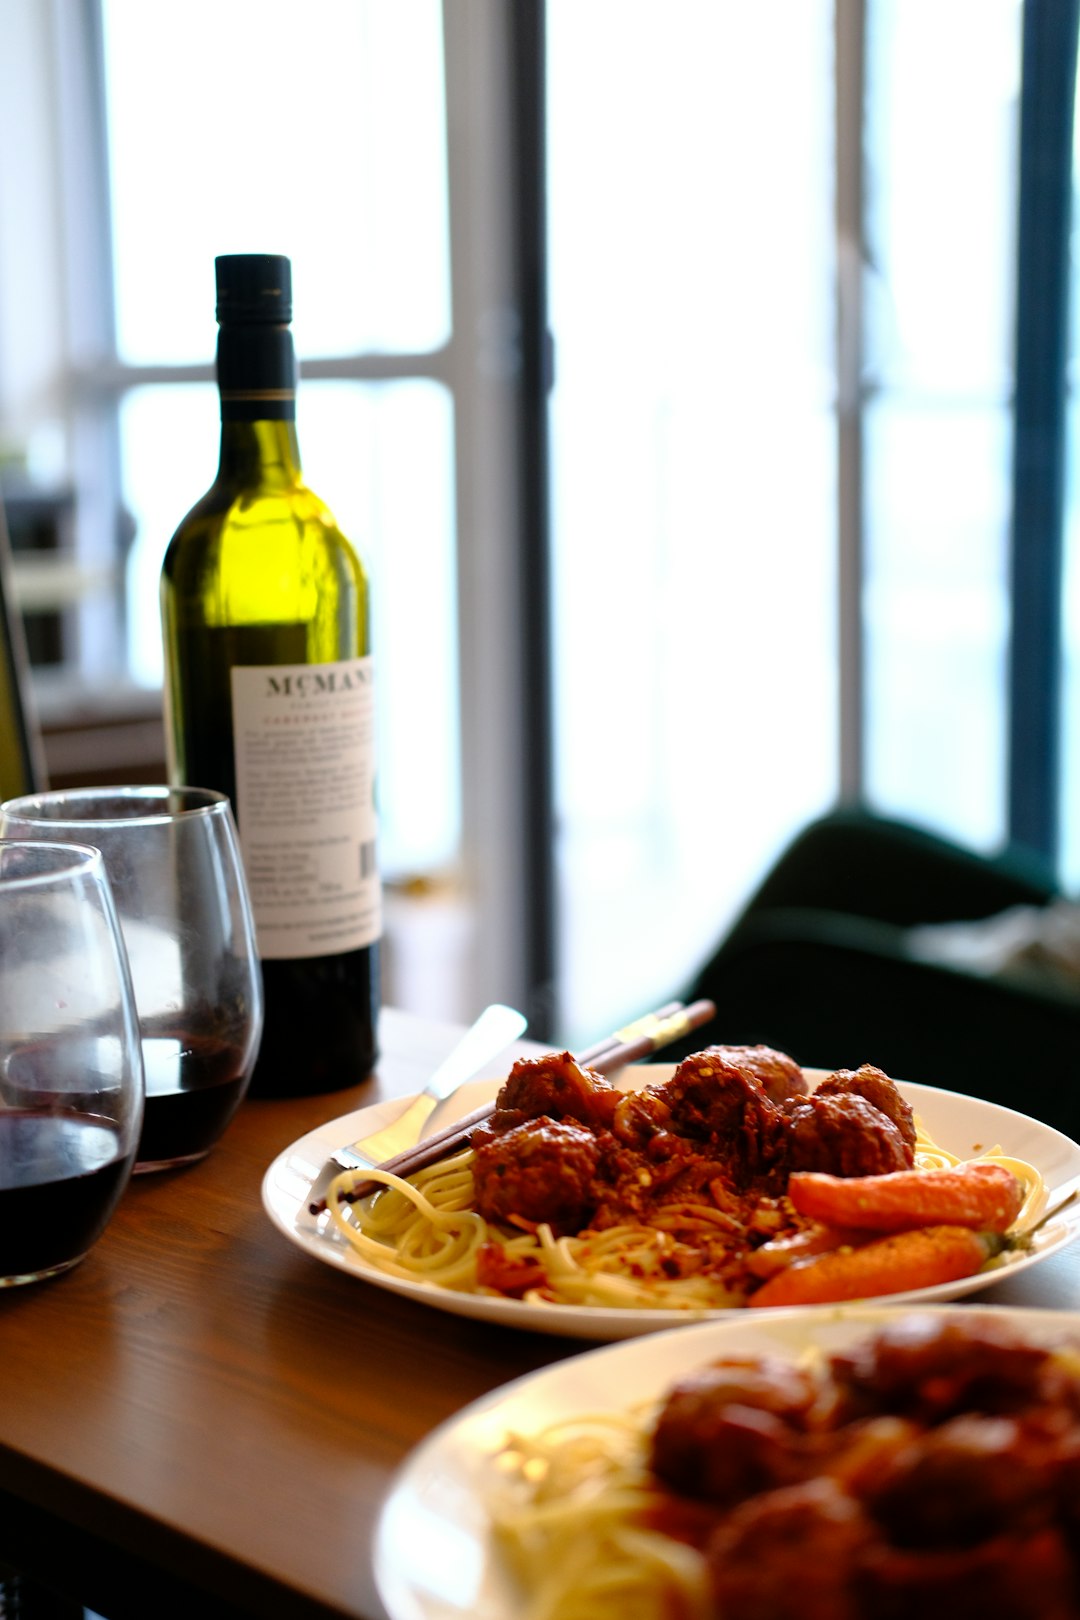 cooked food on white ceramic plate beside wine bottle on brown wooden table